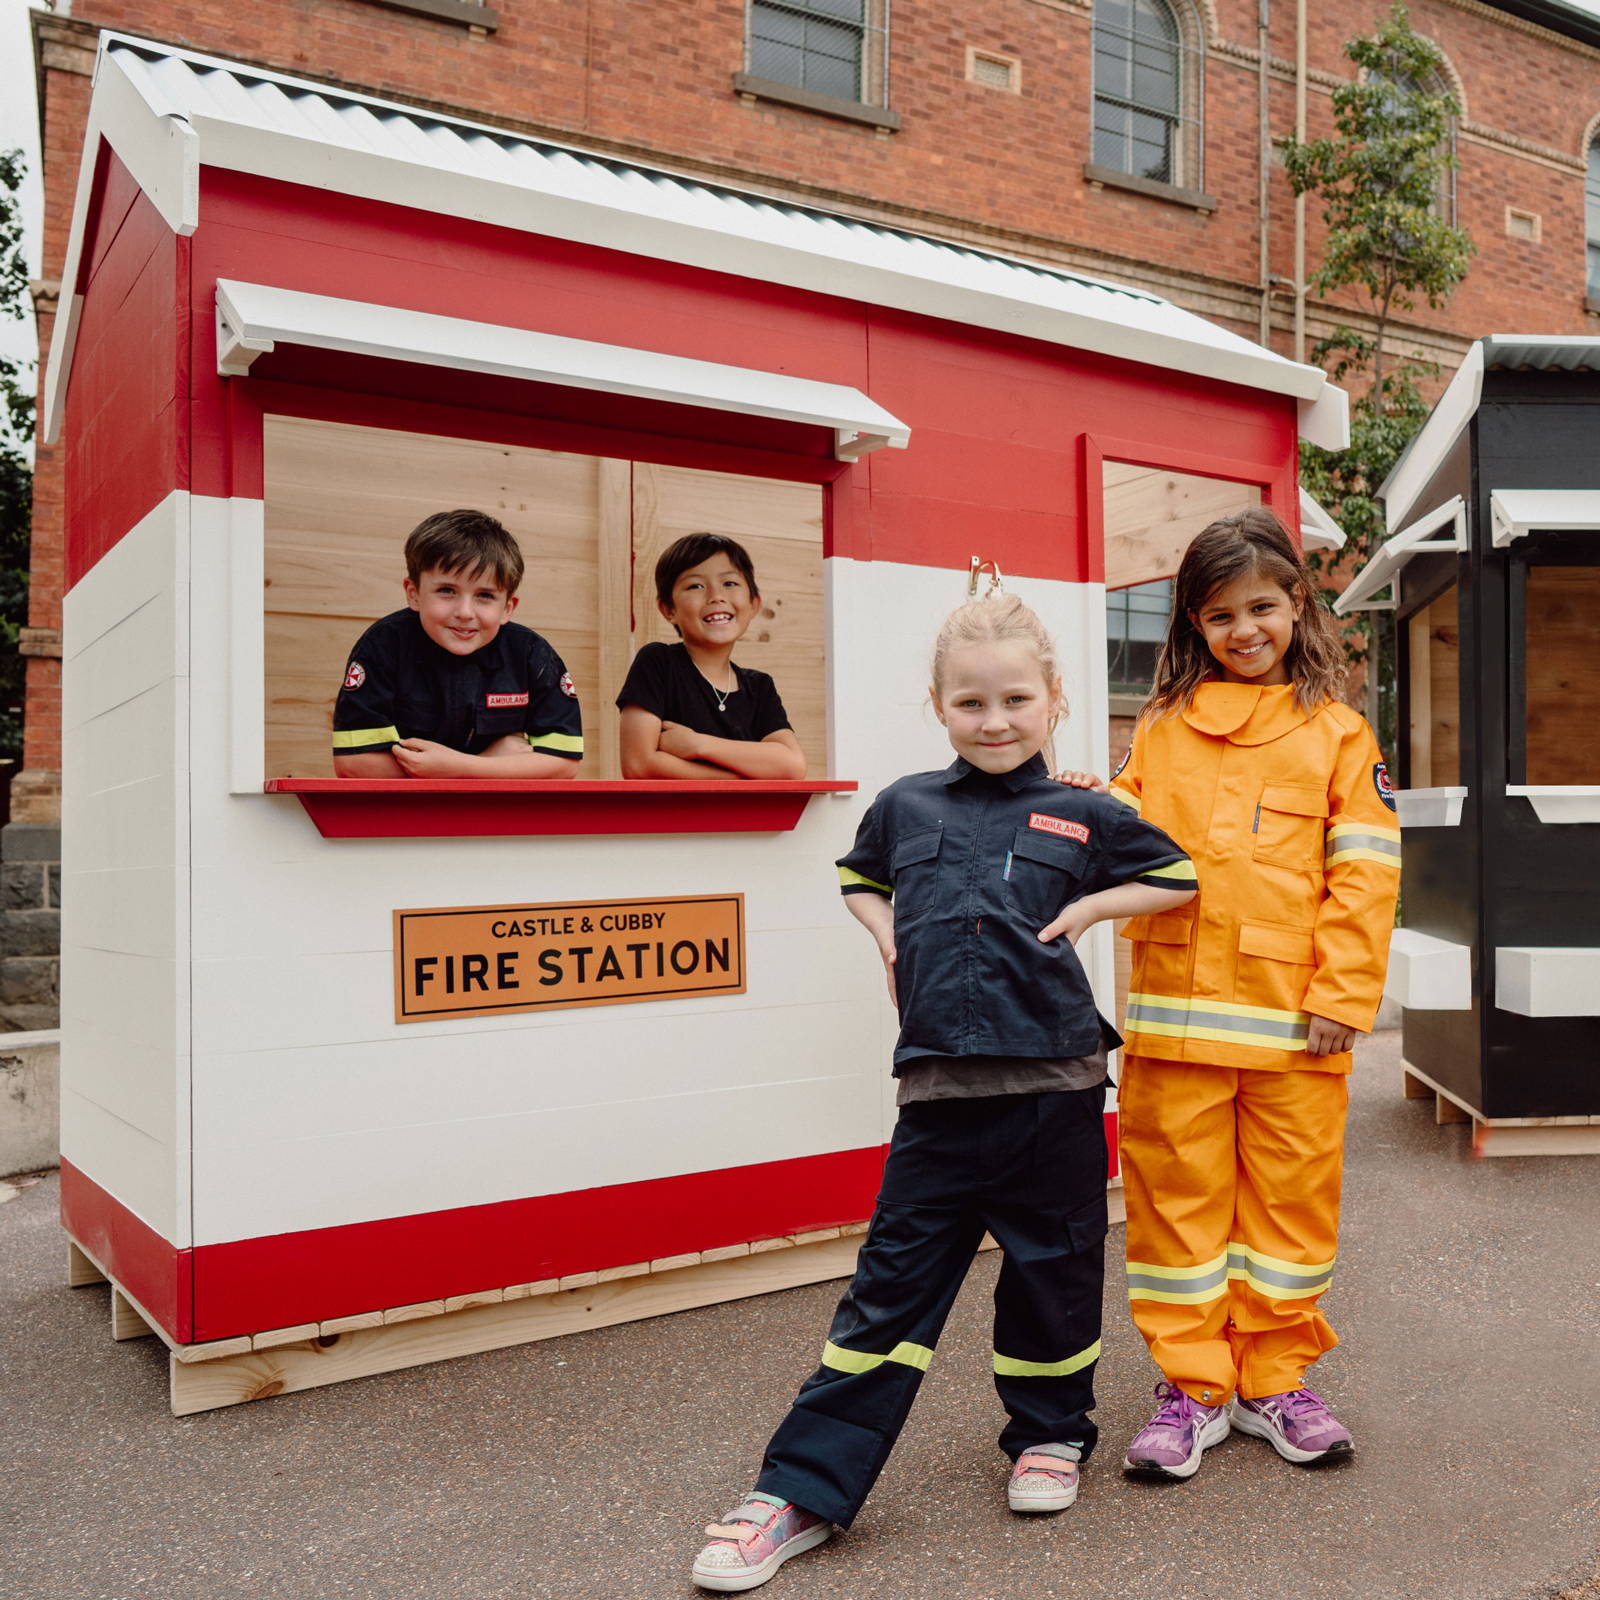 Children wearing firefighter's costume to play with a themed cubby house.